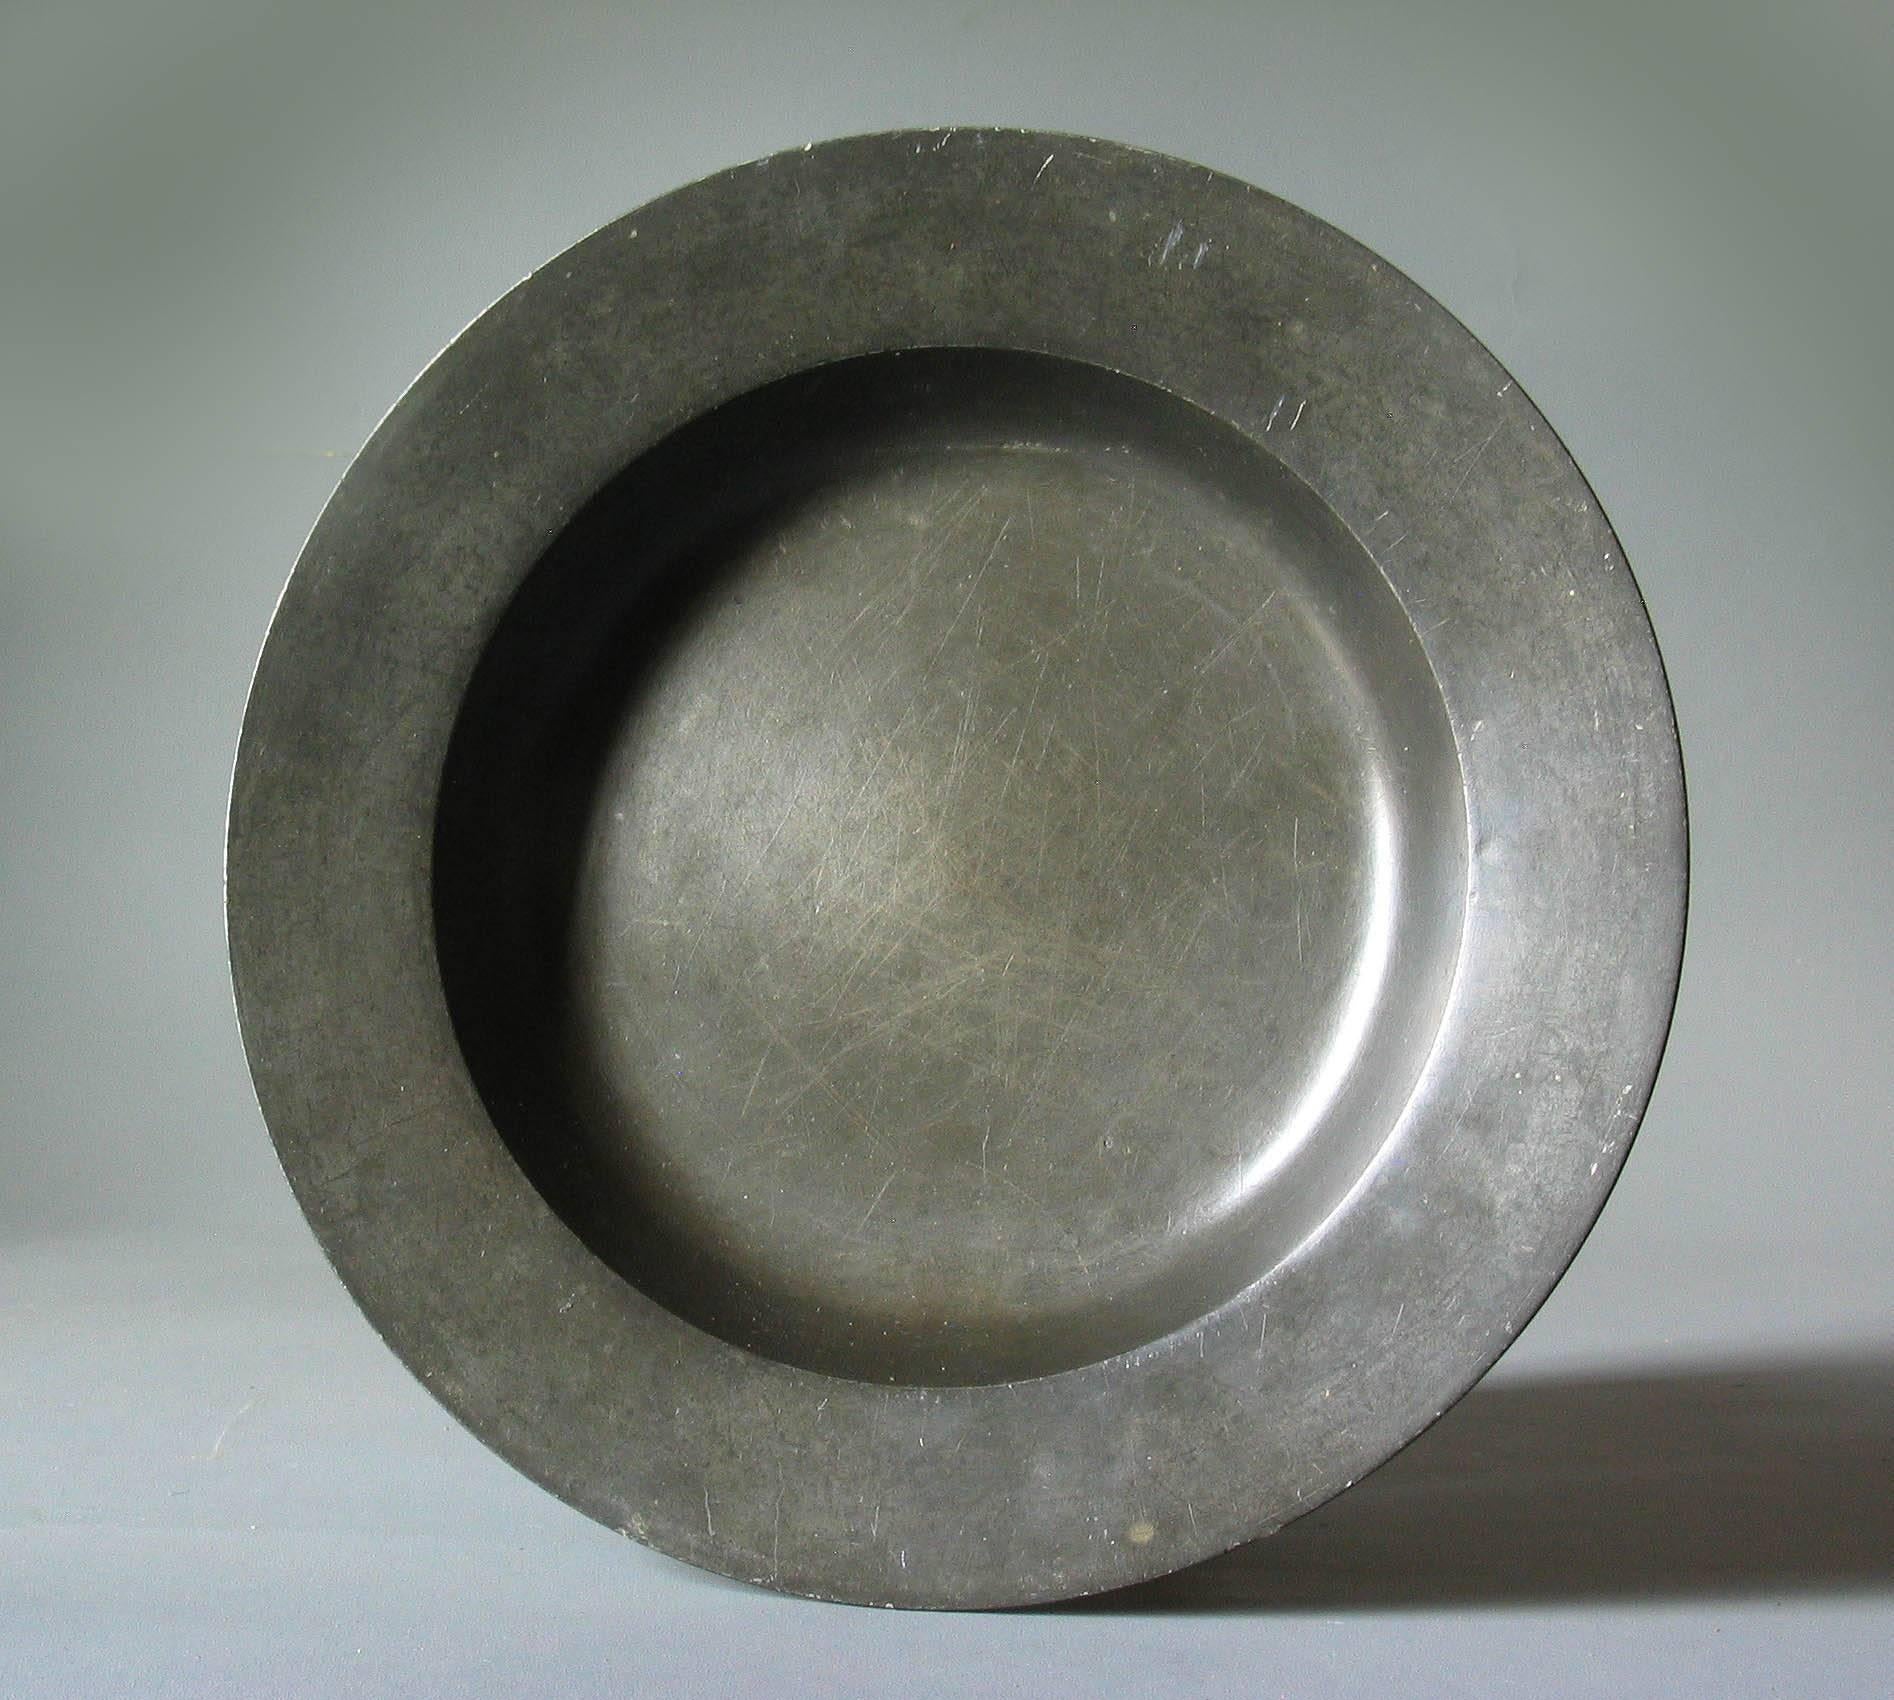 Hand-Crafted Export Pewter Dish and Plate by Townsend & Compton of London, 1784-1802